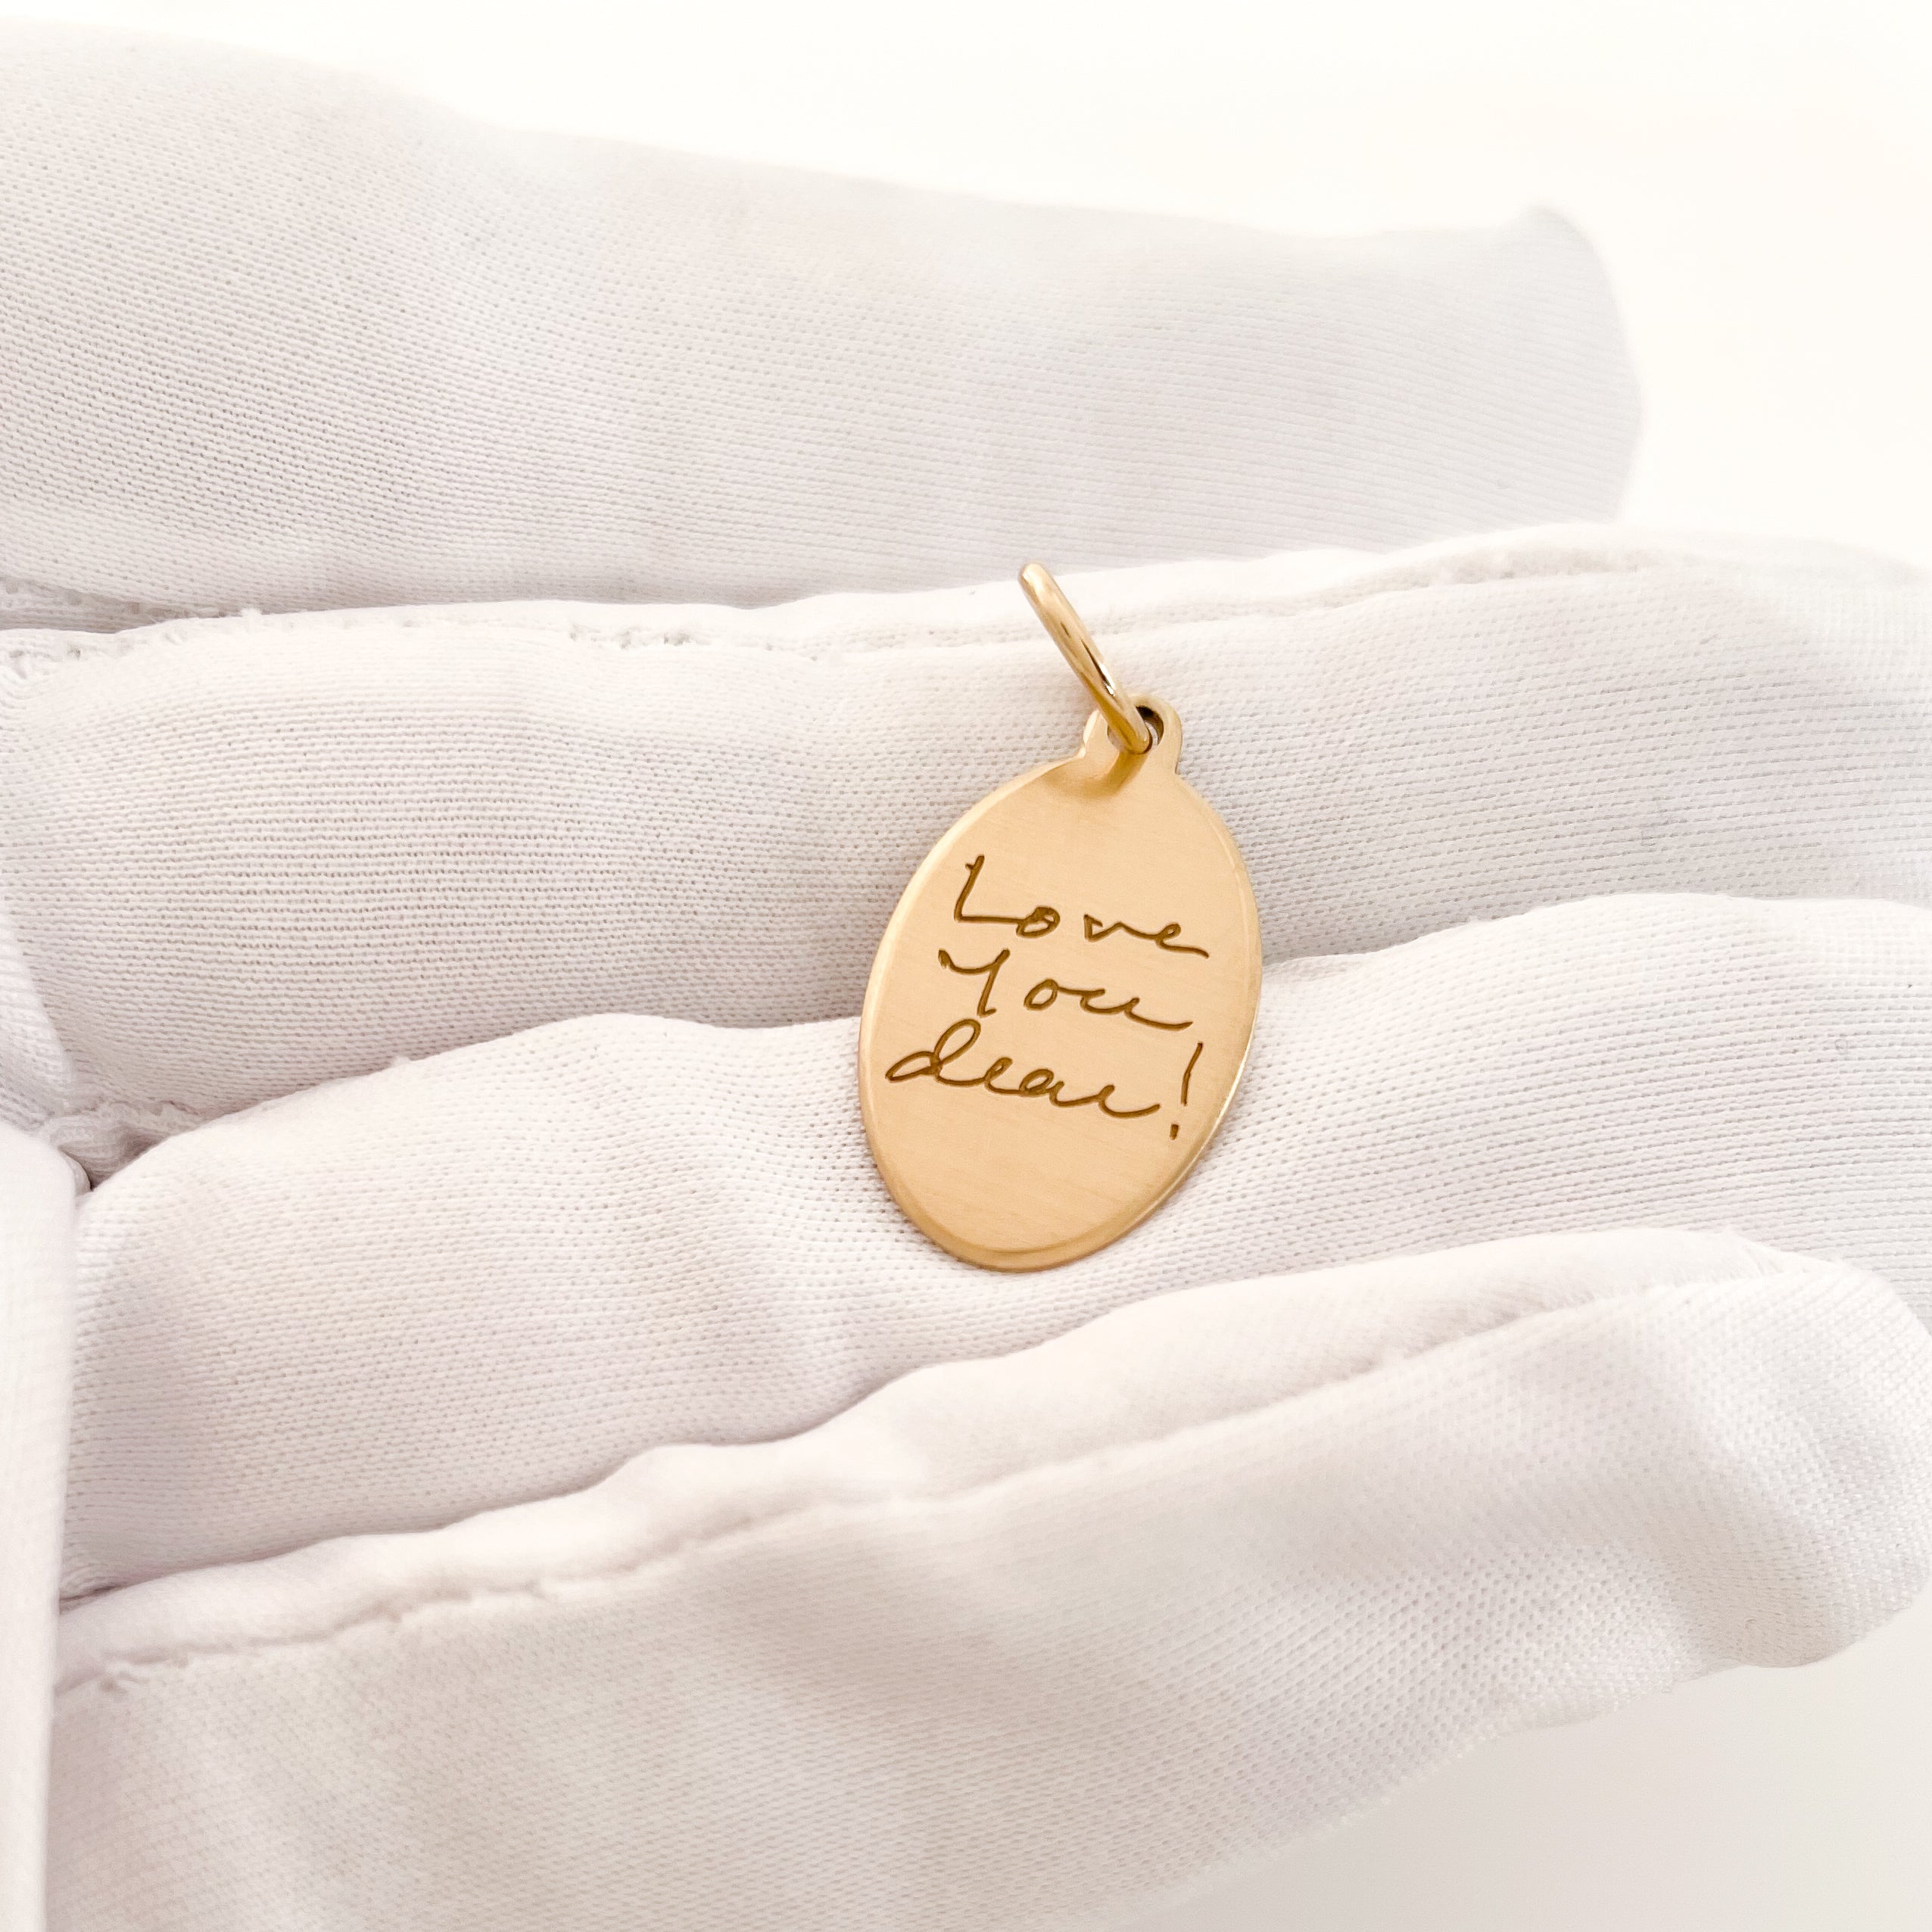 Nora Pendant | Scale In Hand | Handwriting Personalized Charm | Scripted Jewelry